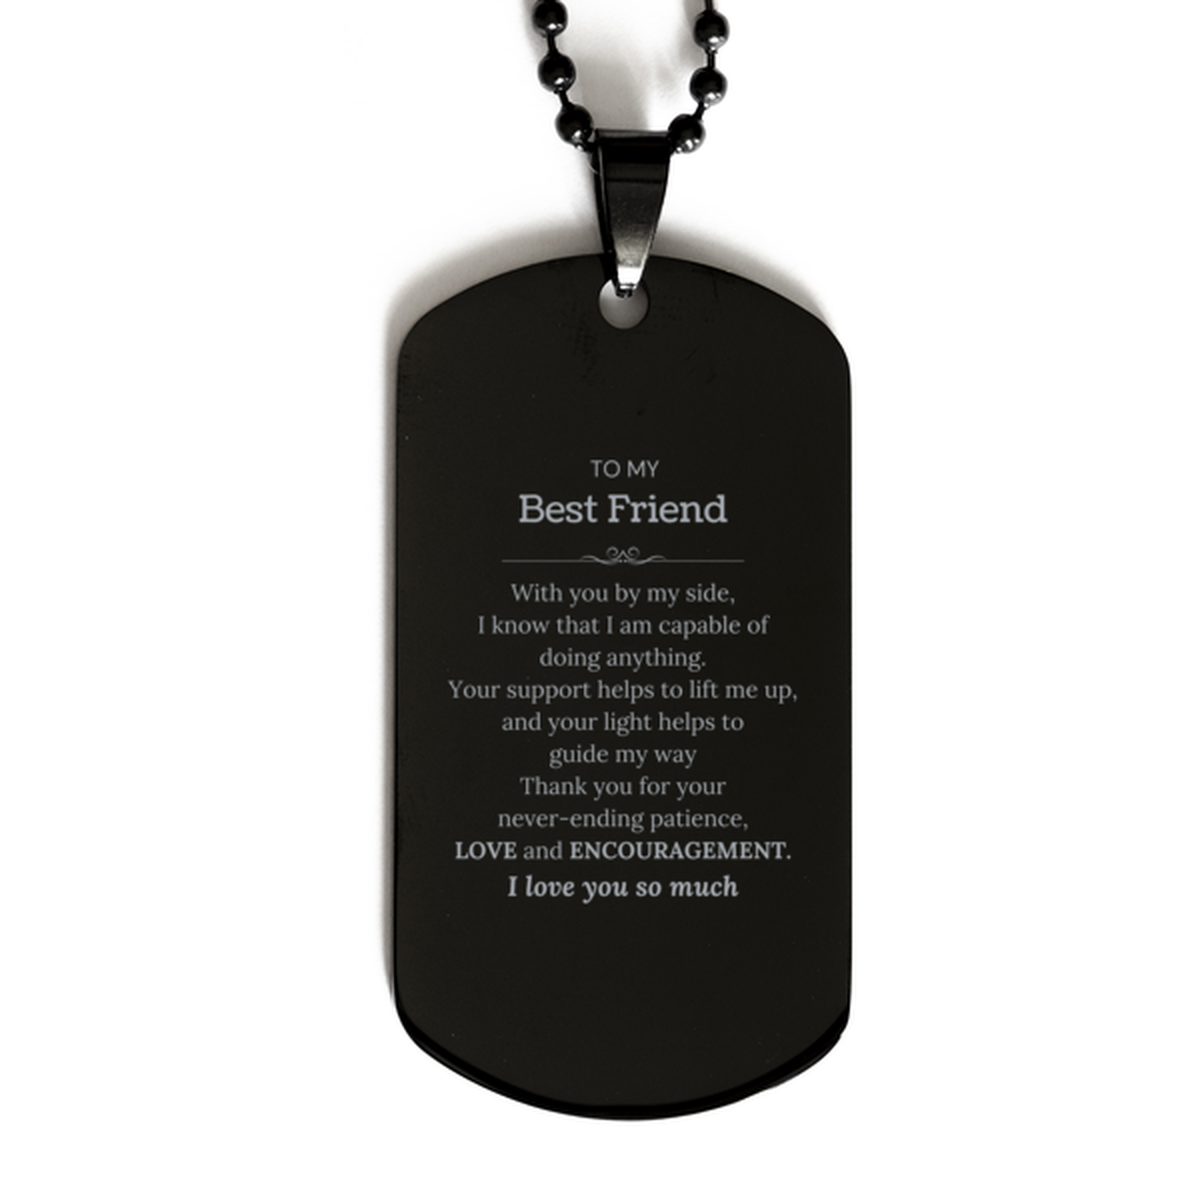 Appreciation Best Friend Black Dog Tag Gifts, To My Best Friend Birthday Christmas Wedding Keepsake Gifts for Best Friend With you by my side, I know that I am capable of doing anything. I love you so much